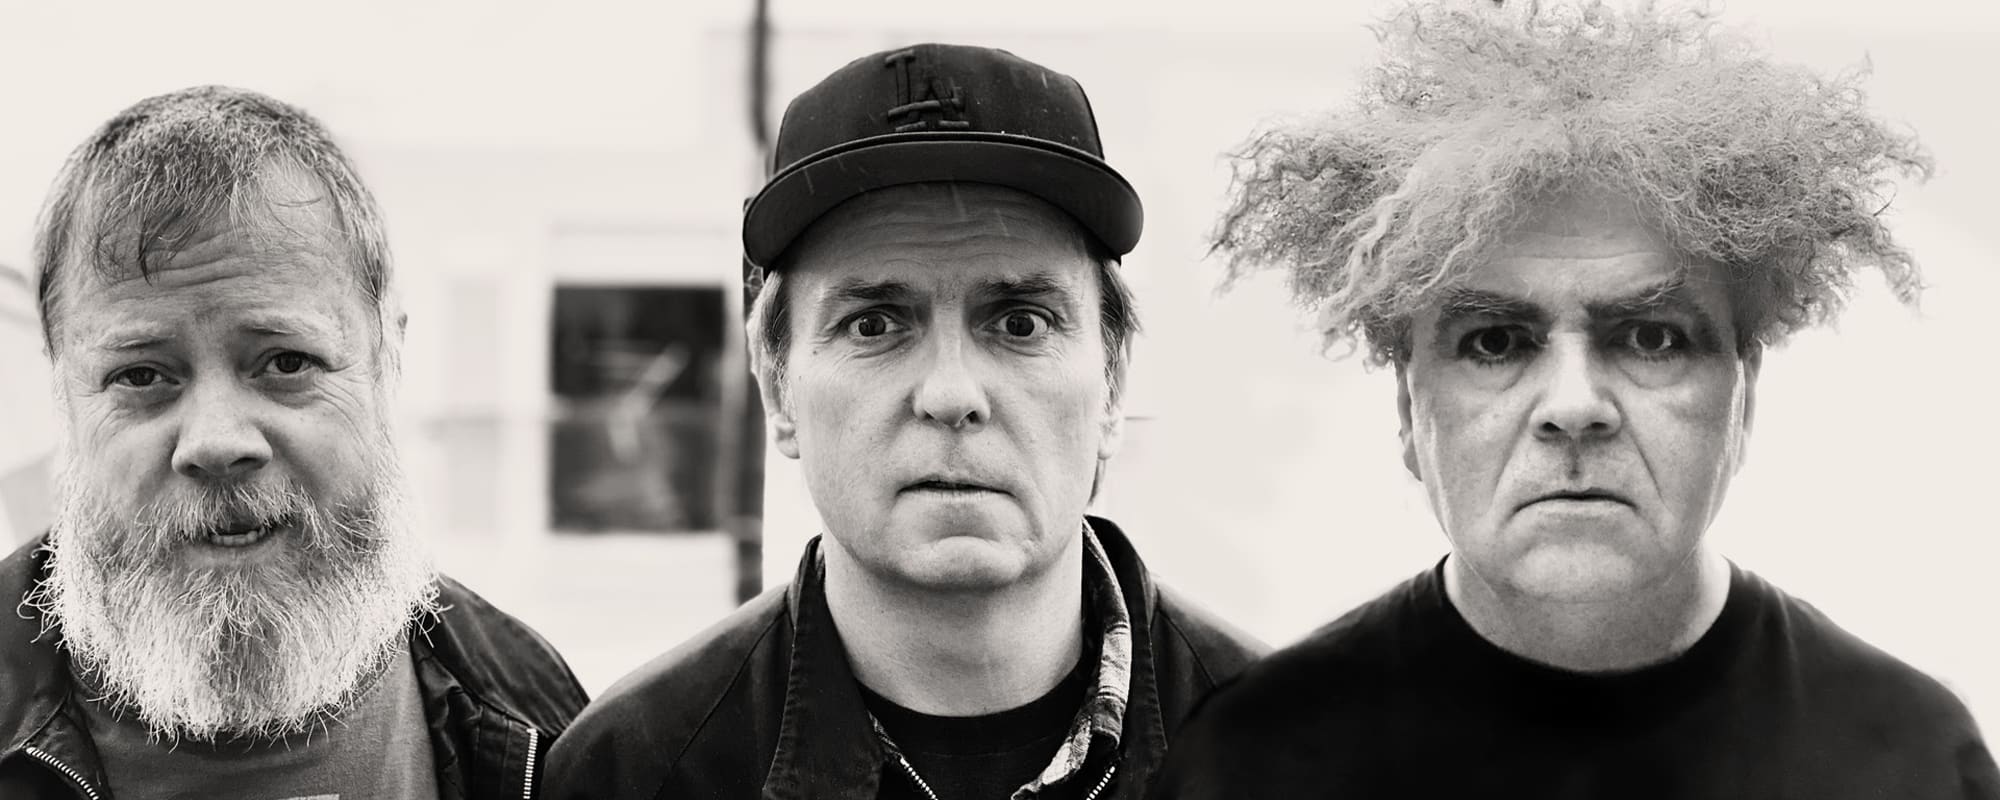 Melvins’ Buzz Osborne Required Time and Patience on New Album, ‘Working With God’